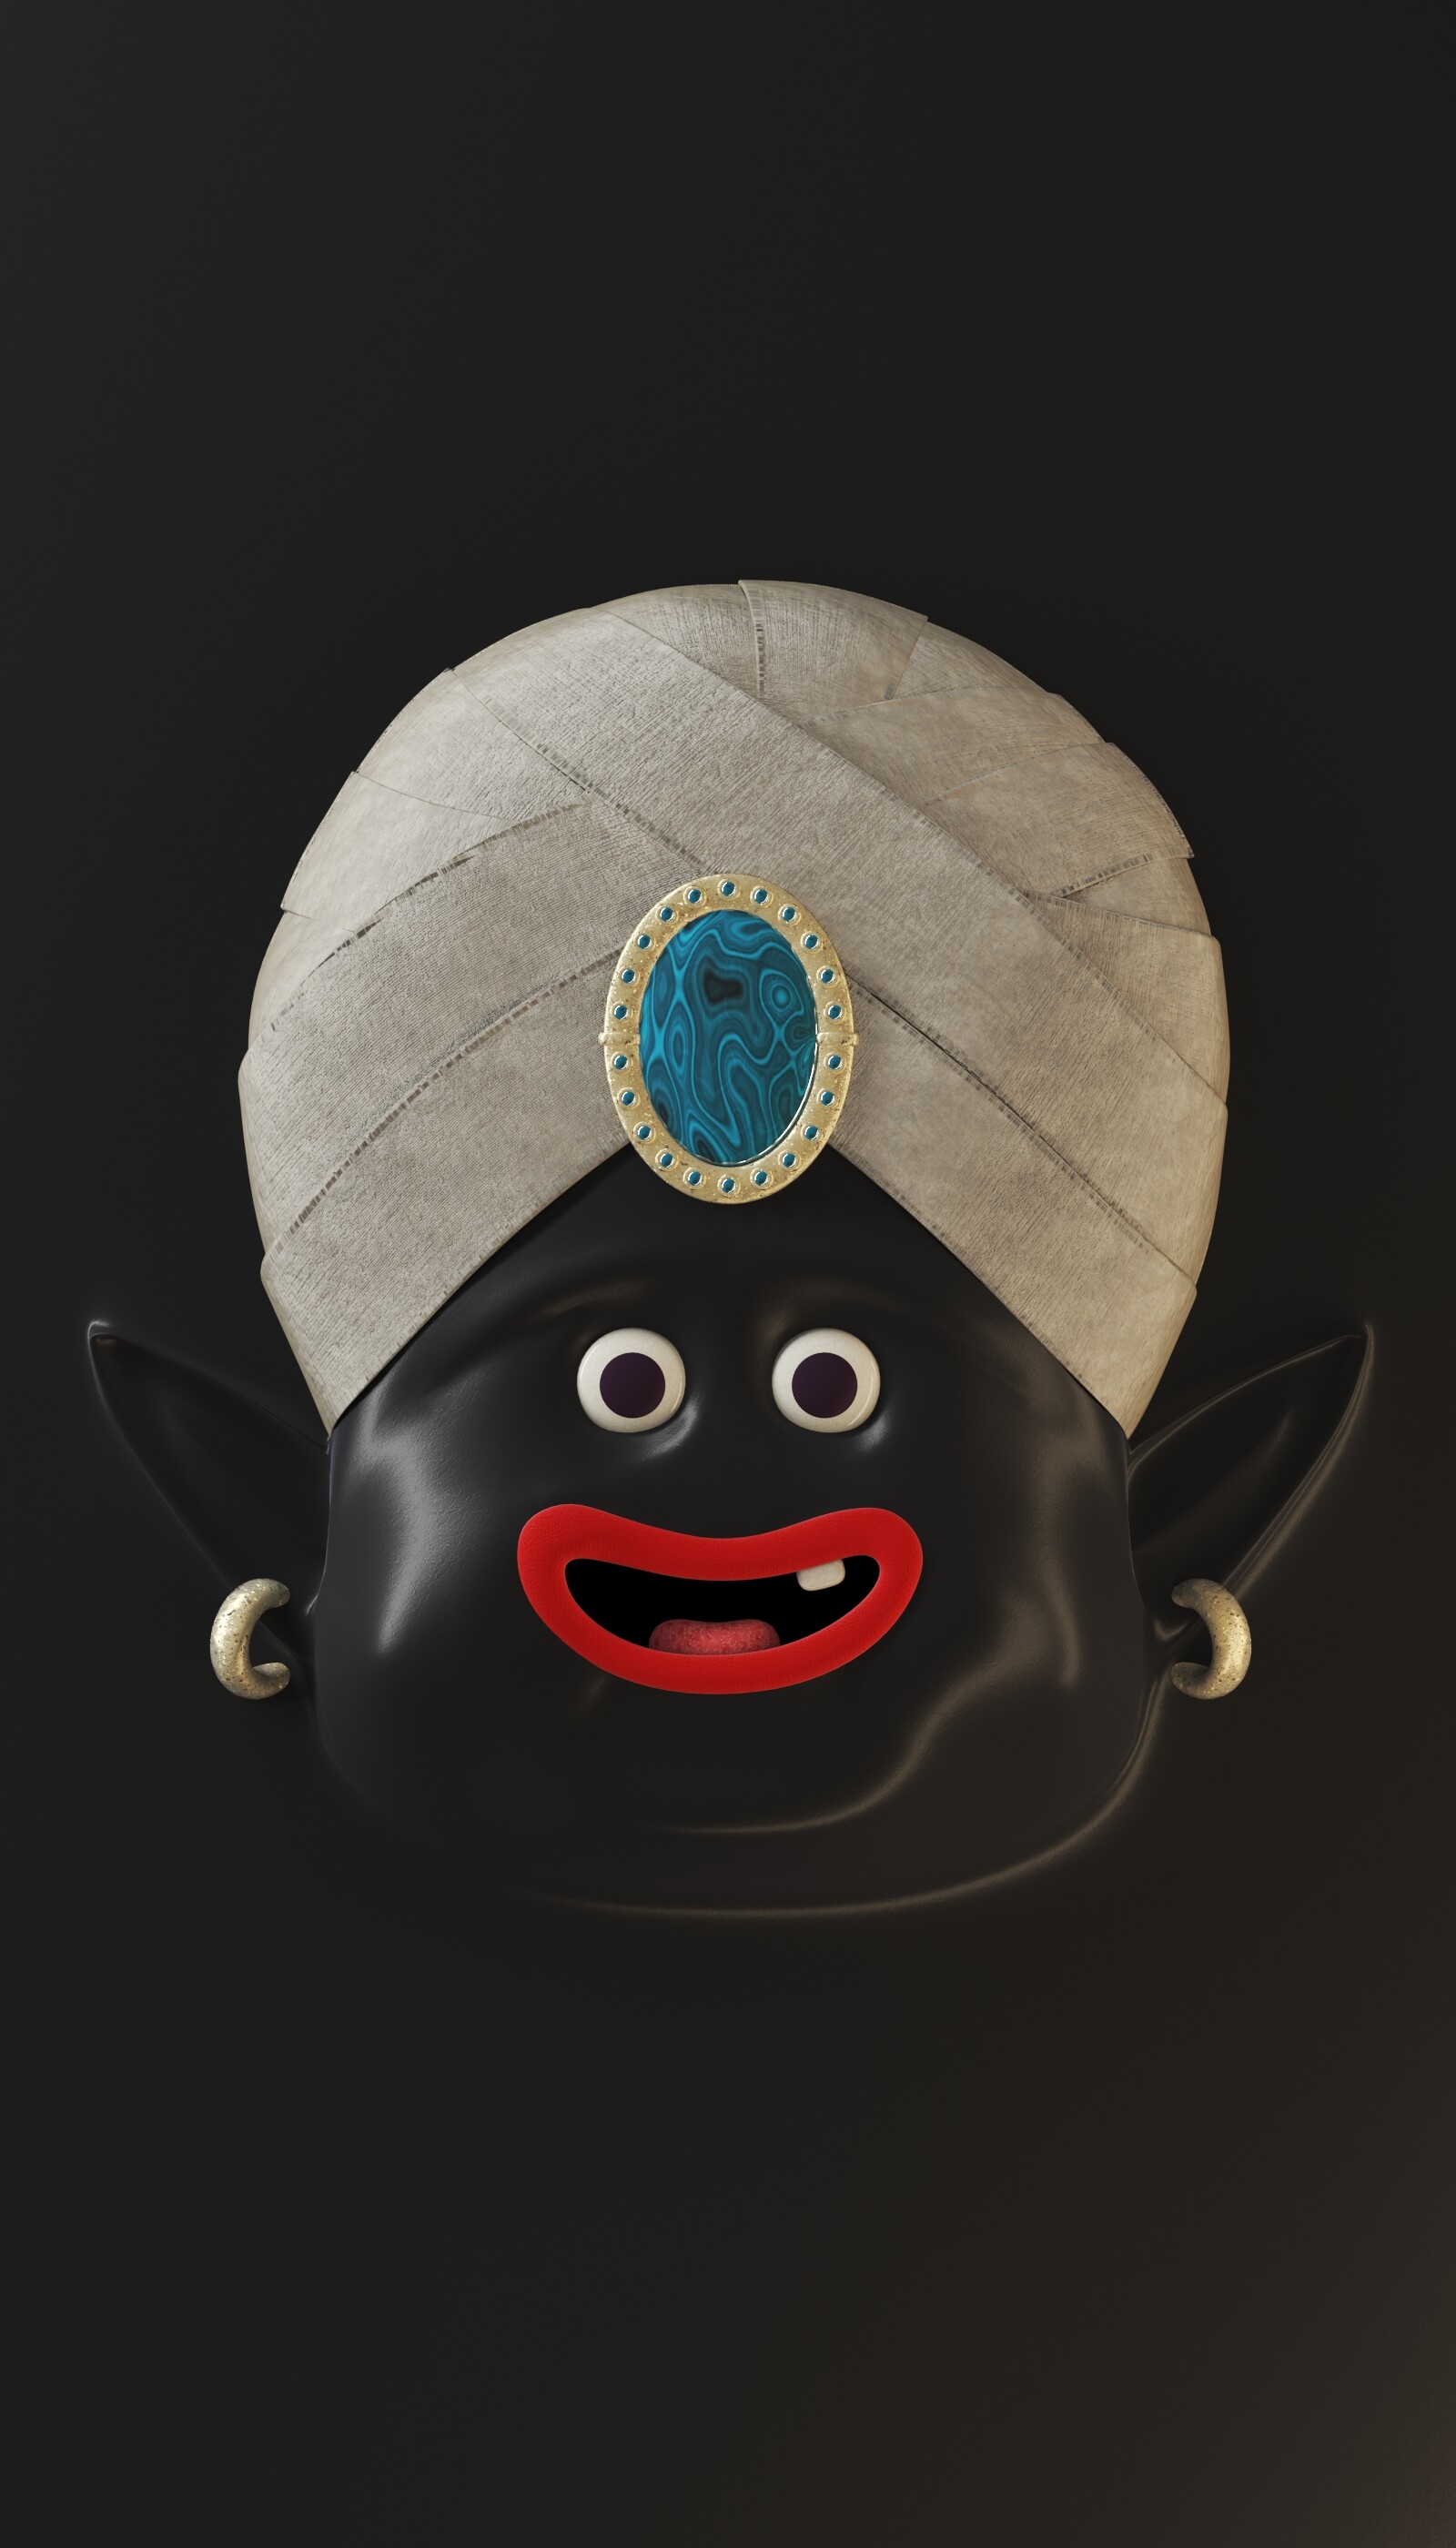 modeling, texturing, lighting and rendering of the face of Mr Popo, from Dr...